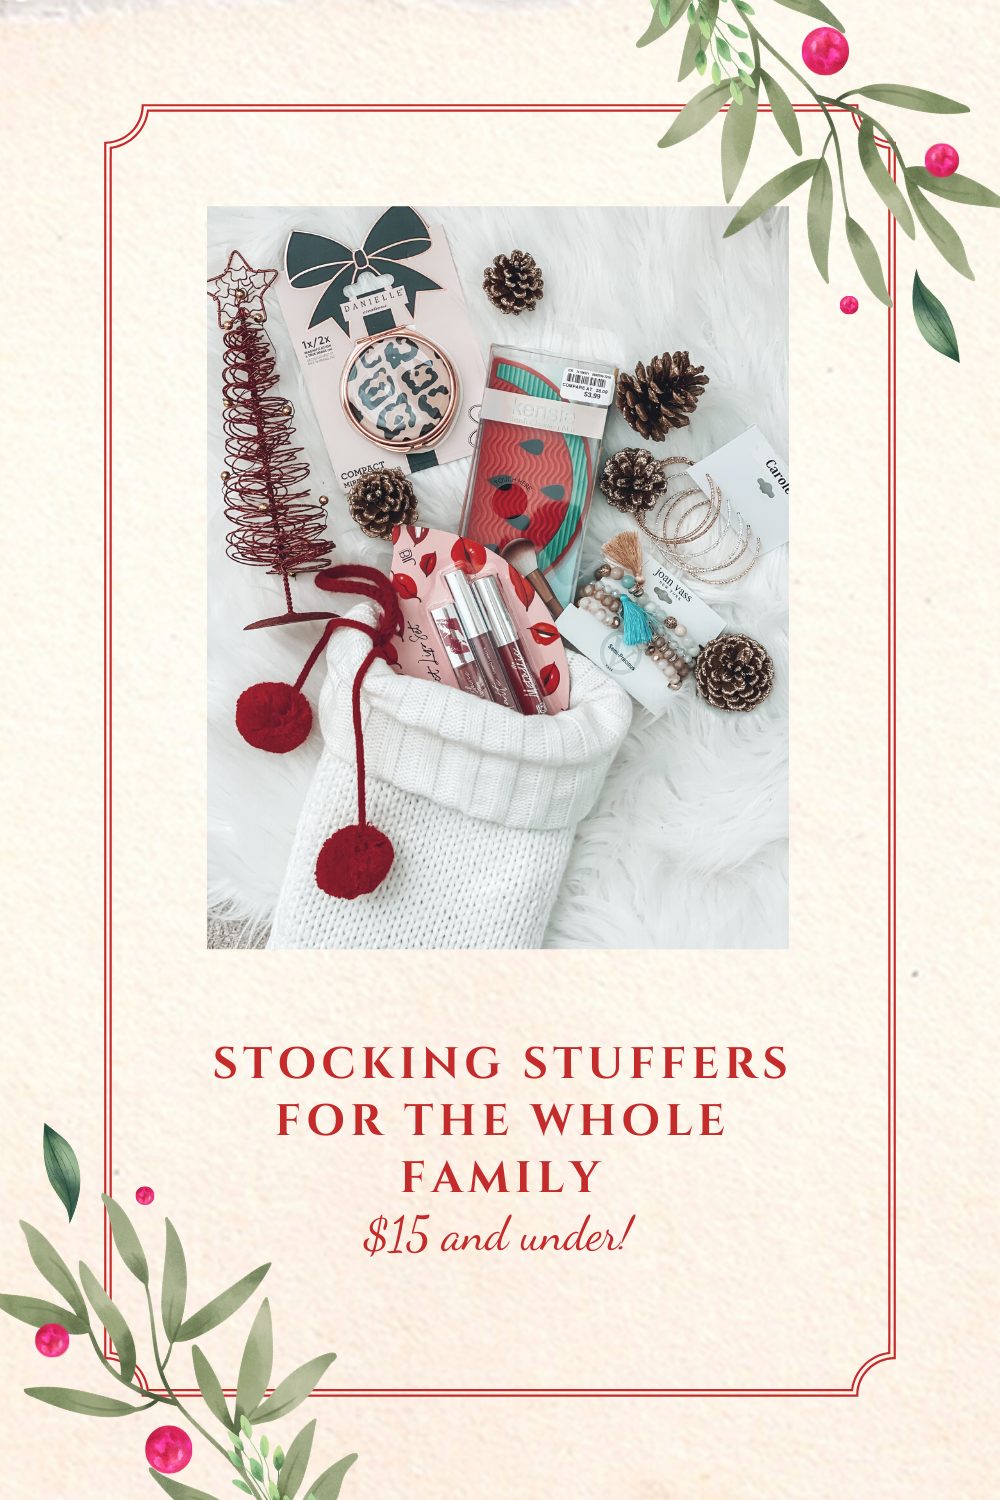 Stocking stuffer ideas for the whole family!